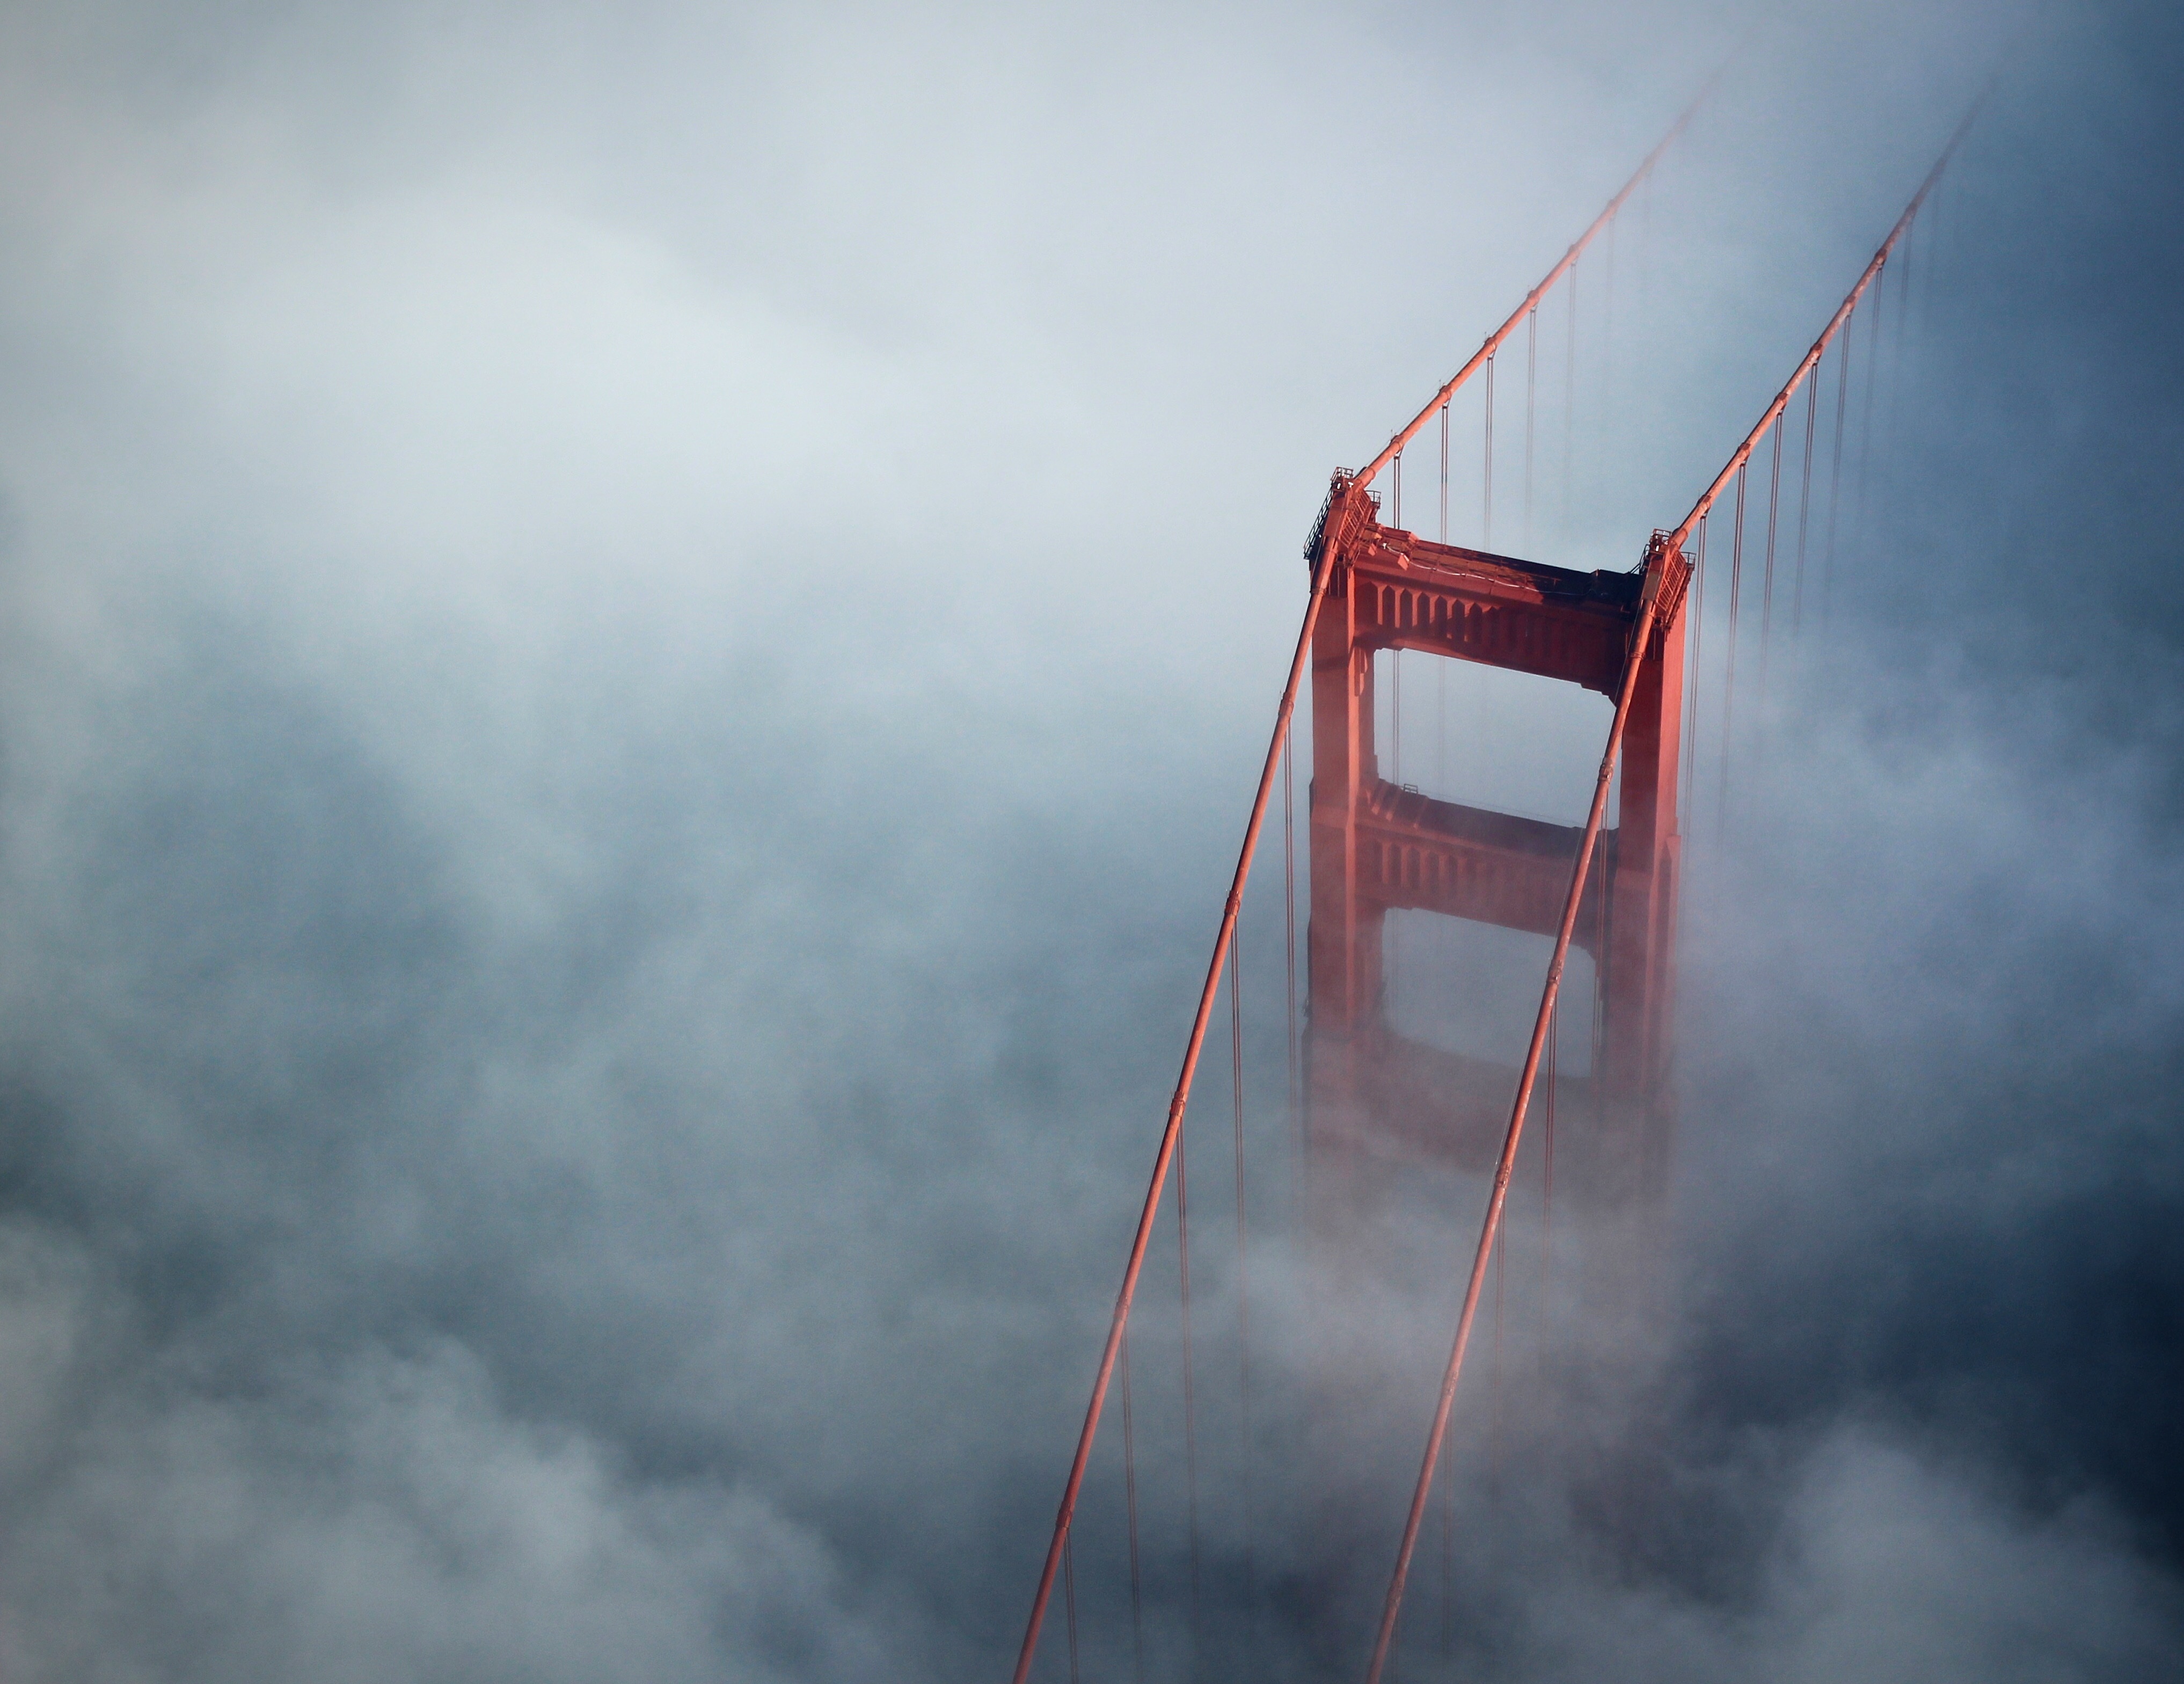 The golden gate bridge in the thick clouds